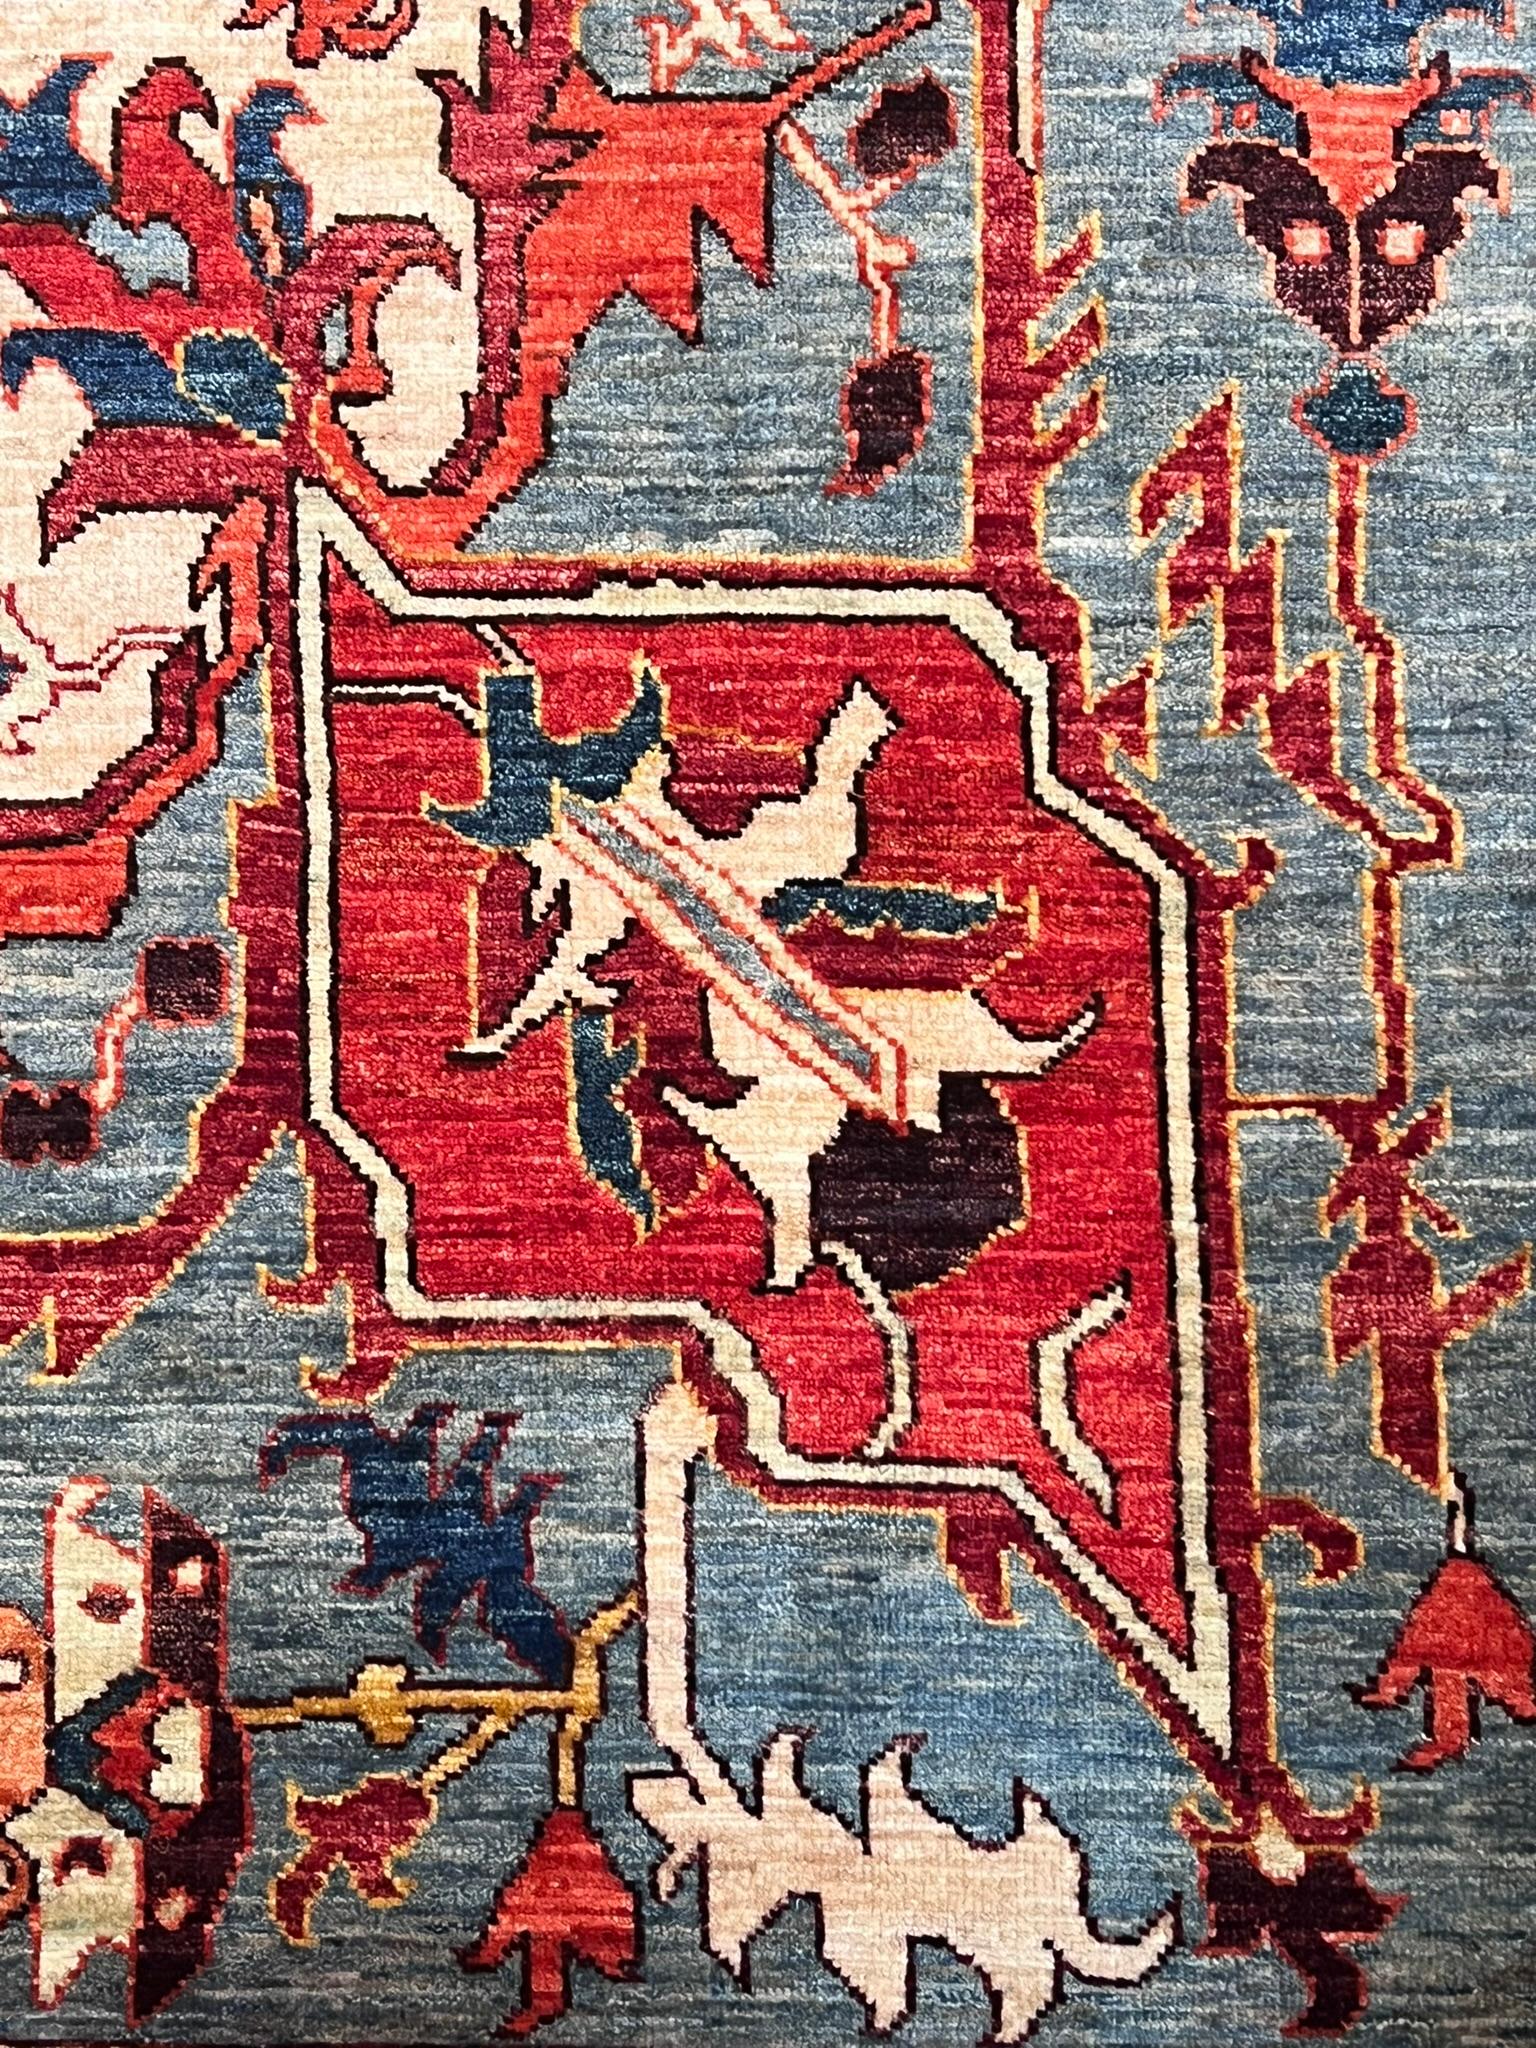 This interesting artifact comes from the Panjshir Valley in northern Afghanistan. High-quality carpets with patterns inspired by classic Persian carpets are made at this location. Our carpet in particular is reminiscent of ancient Serapi carpets,